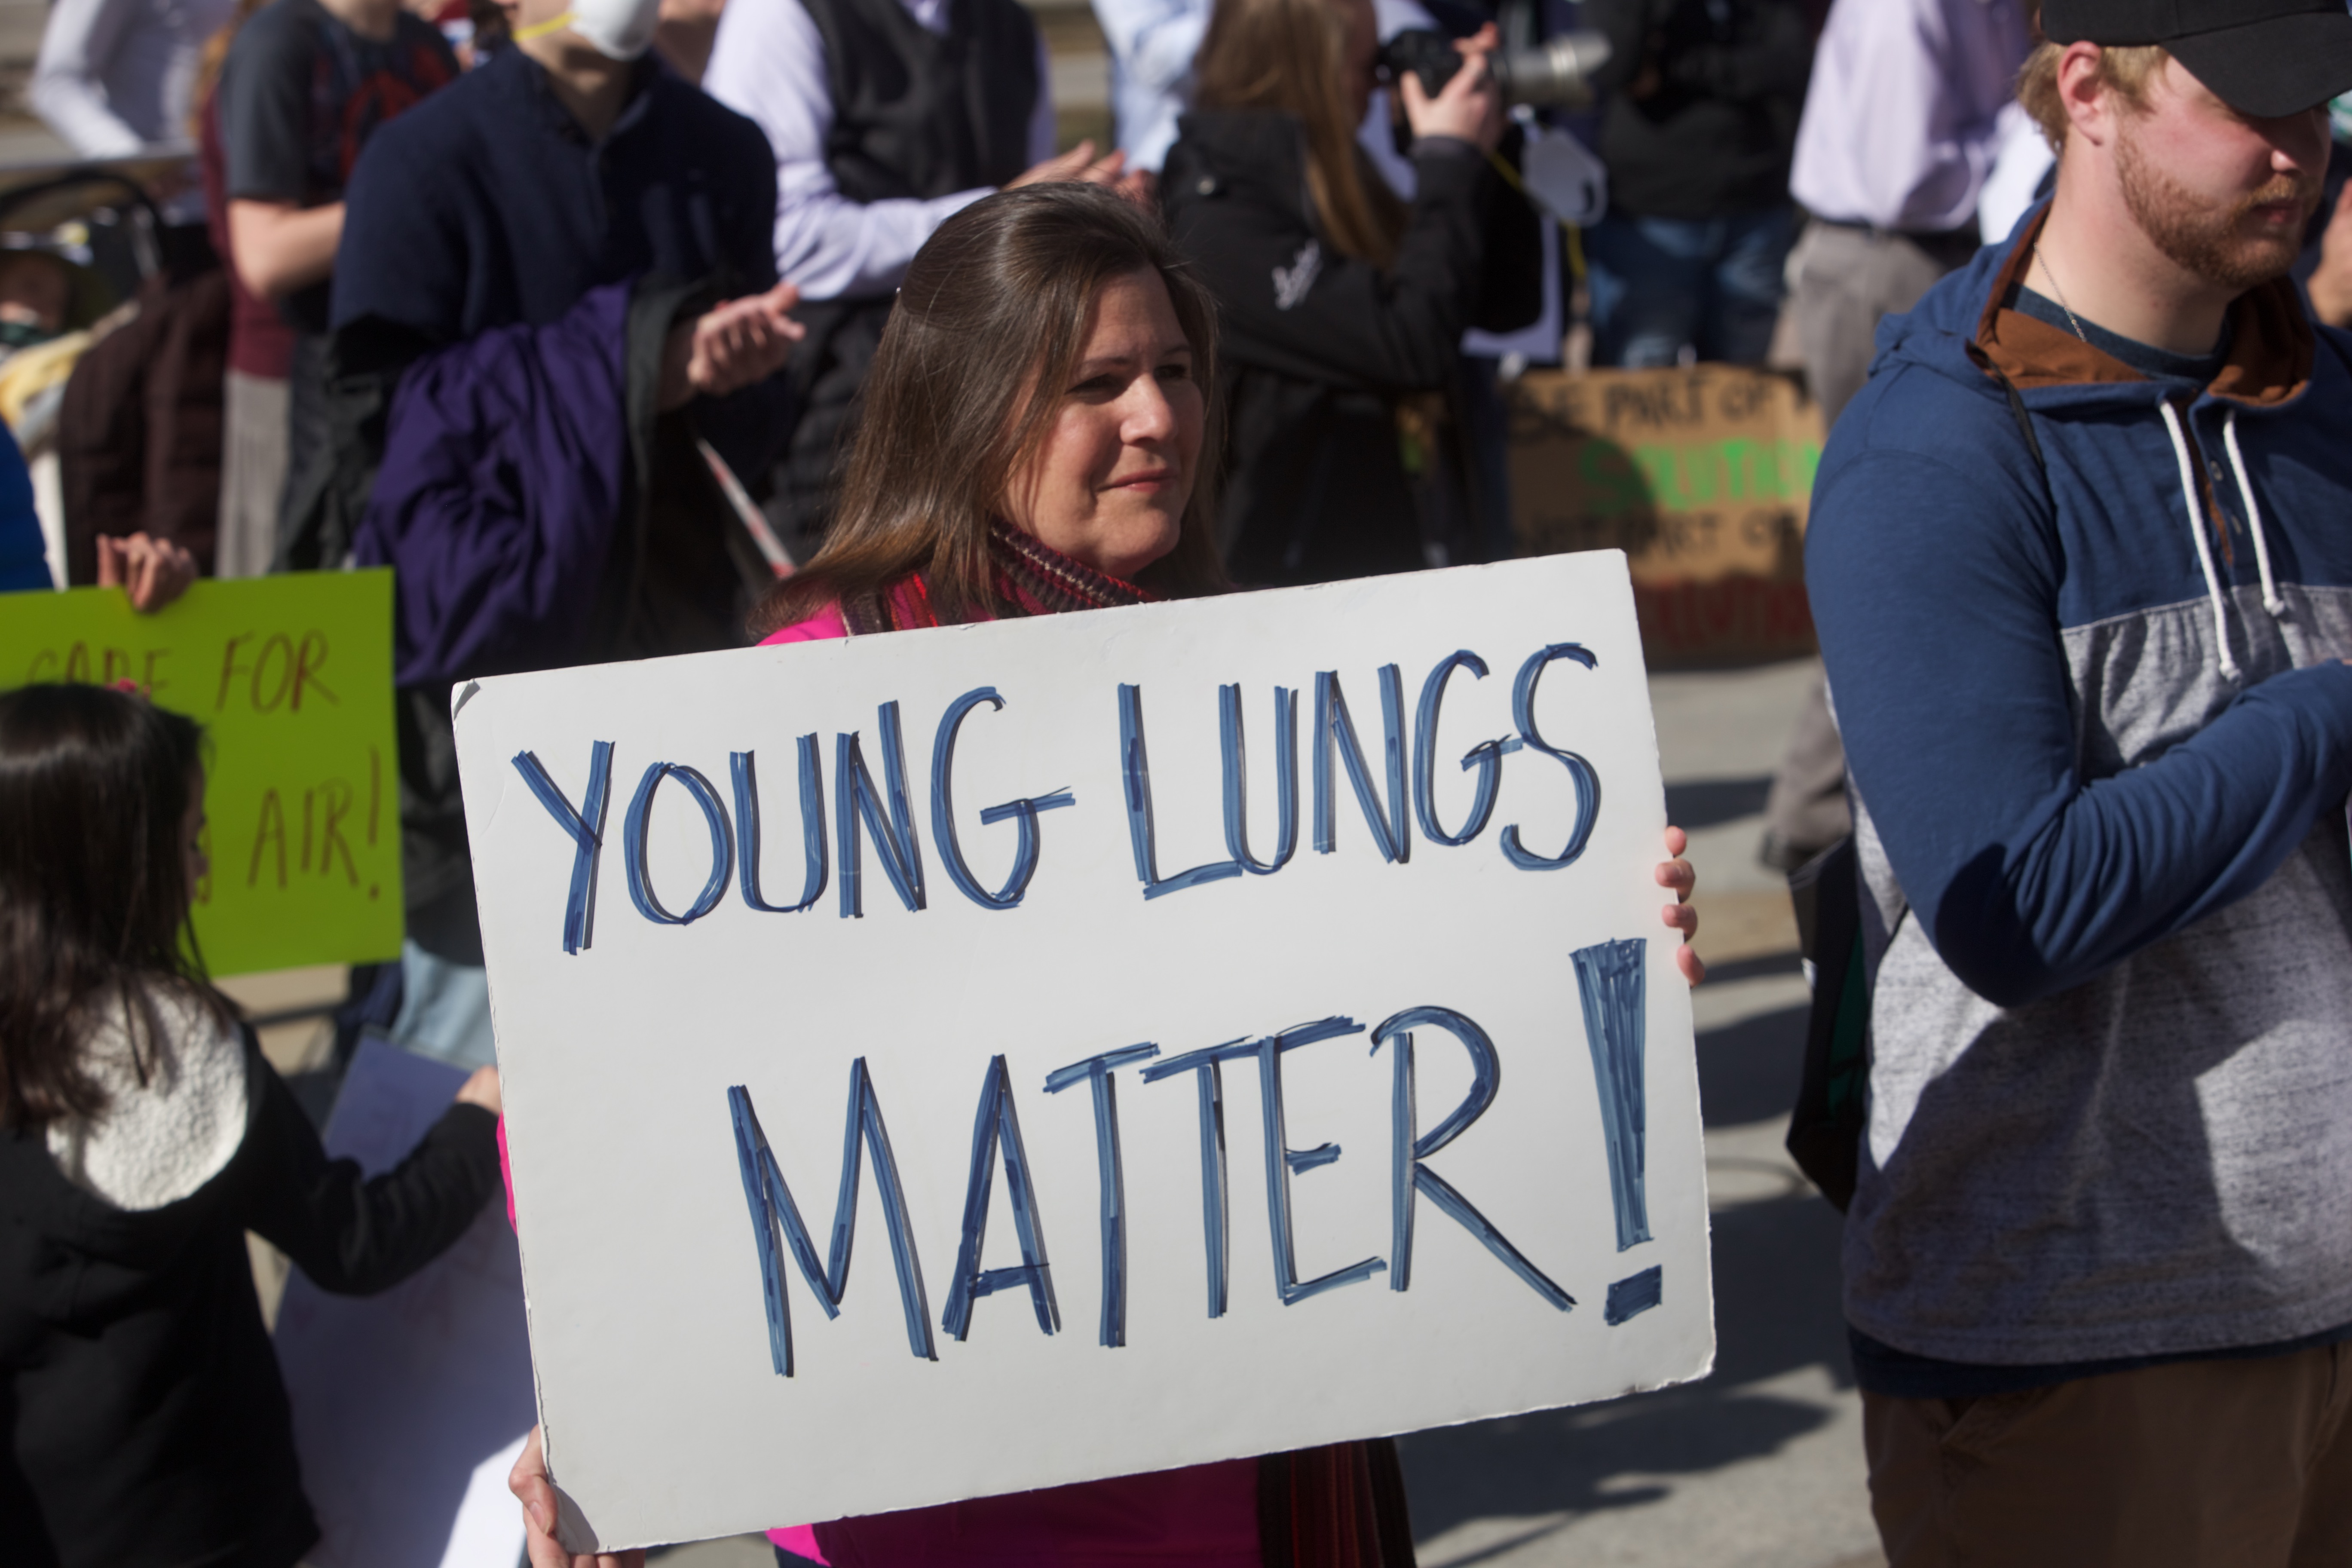 Utah Moms for Clean Air Founder Cherise Udell said she took action when she learned about the negative health effects of bad air. (Gianluca Cuestas)